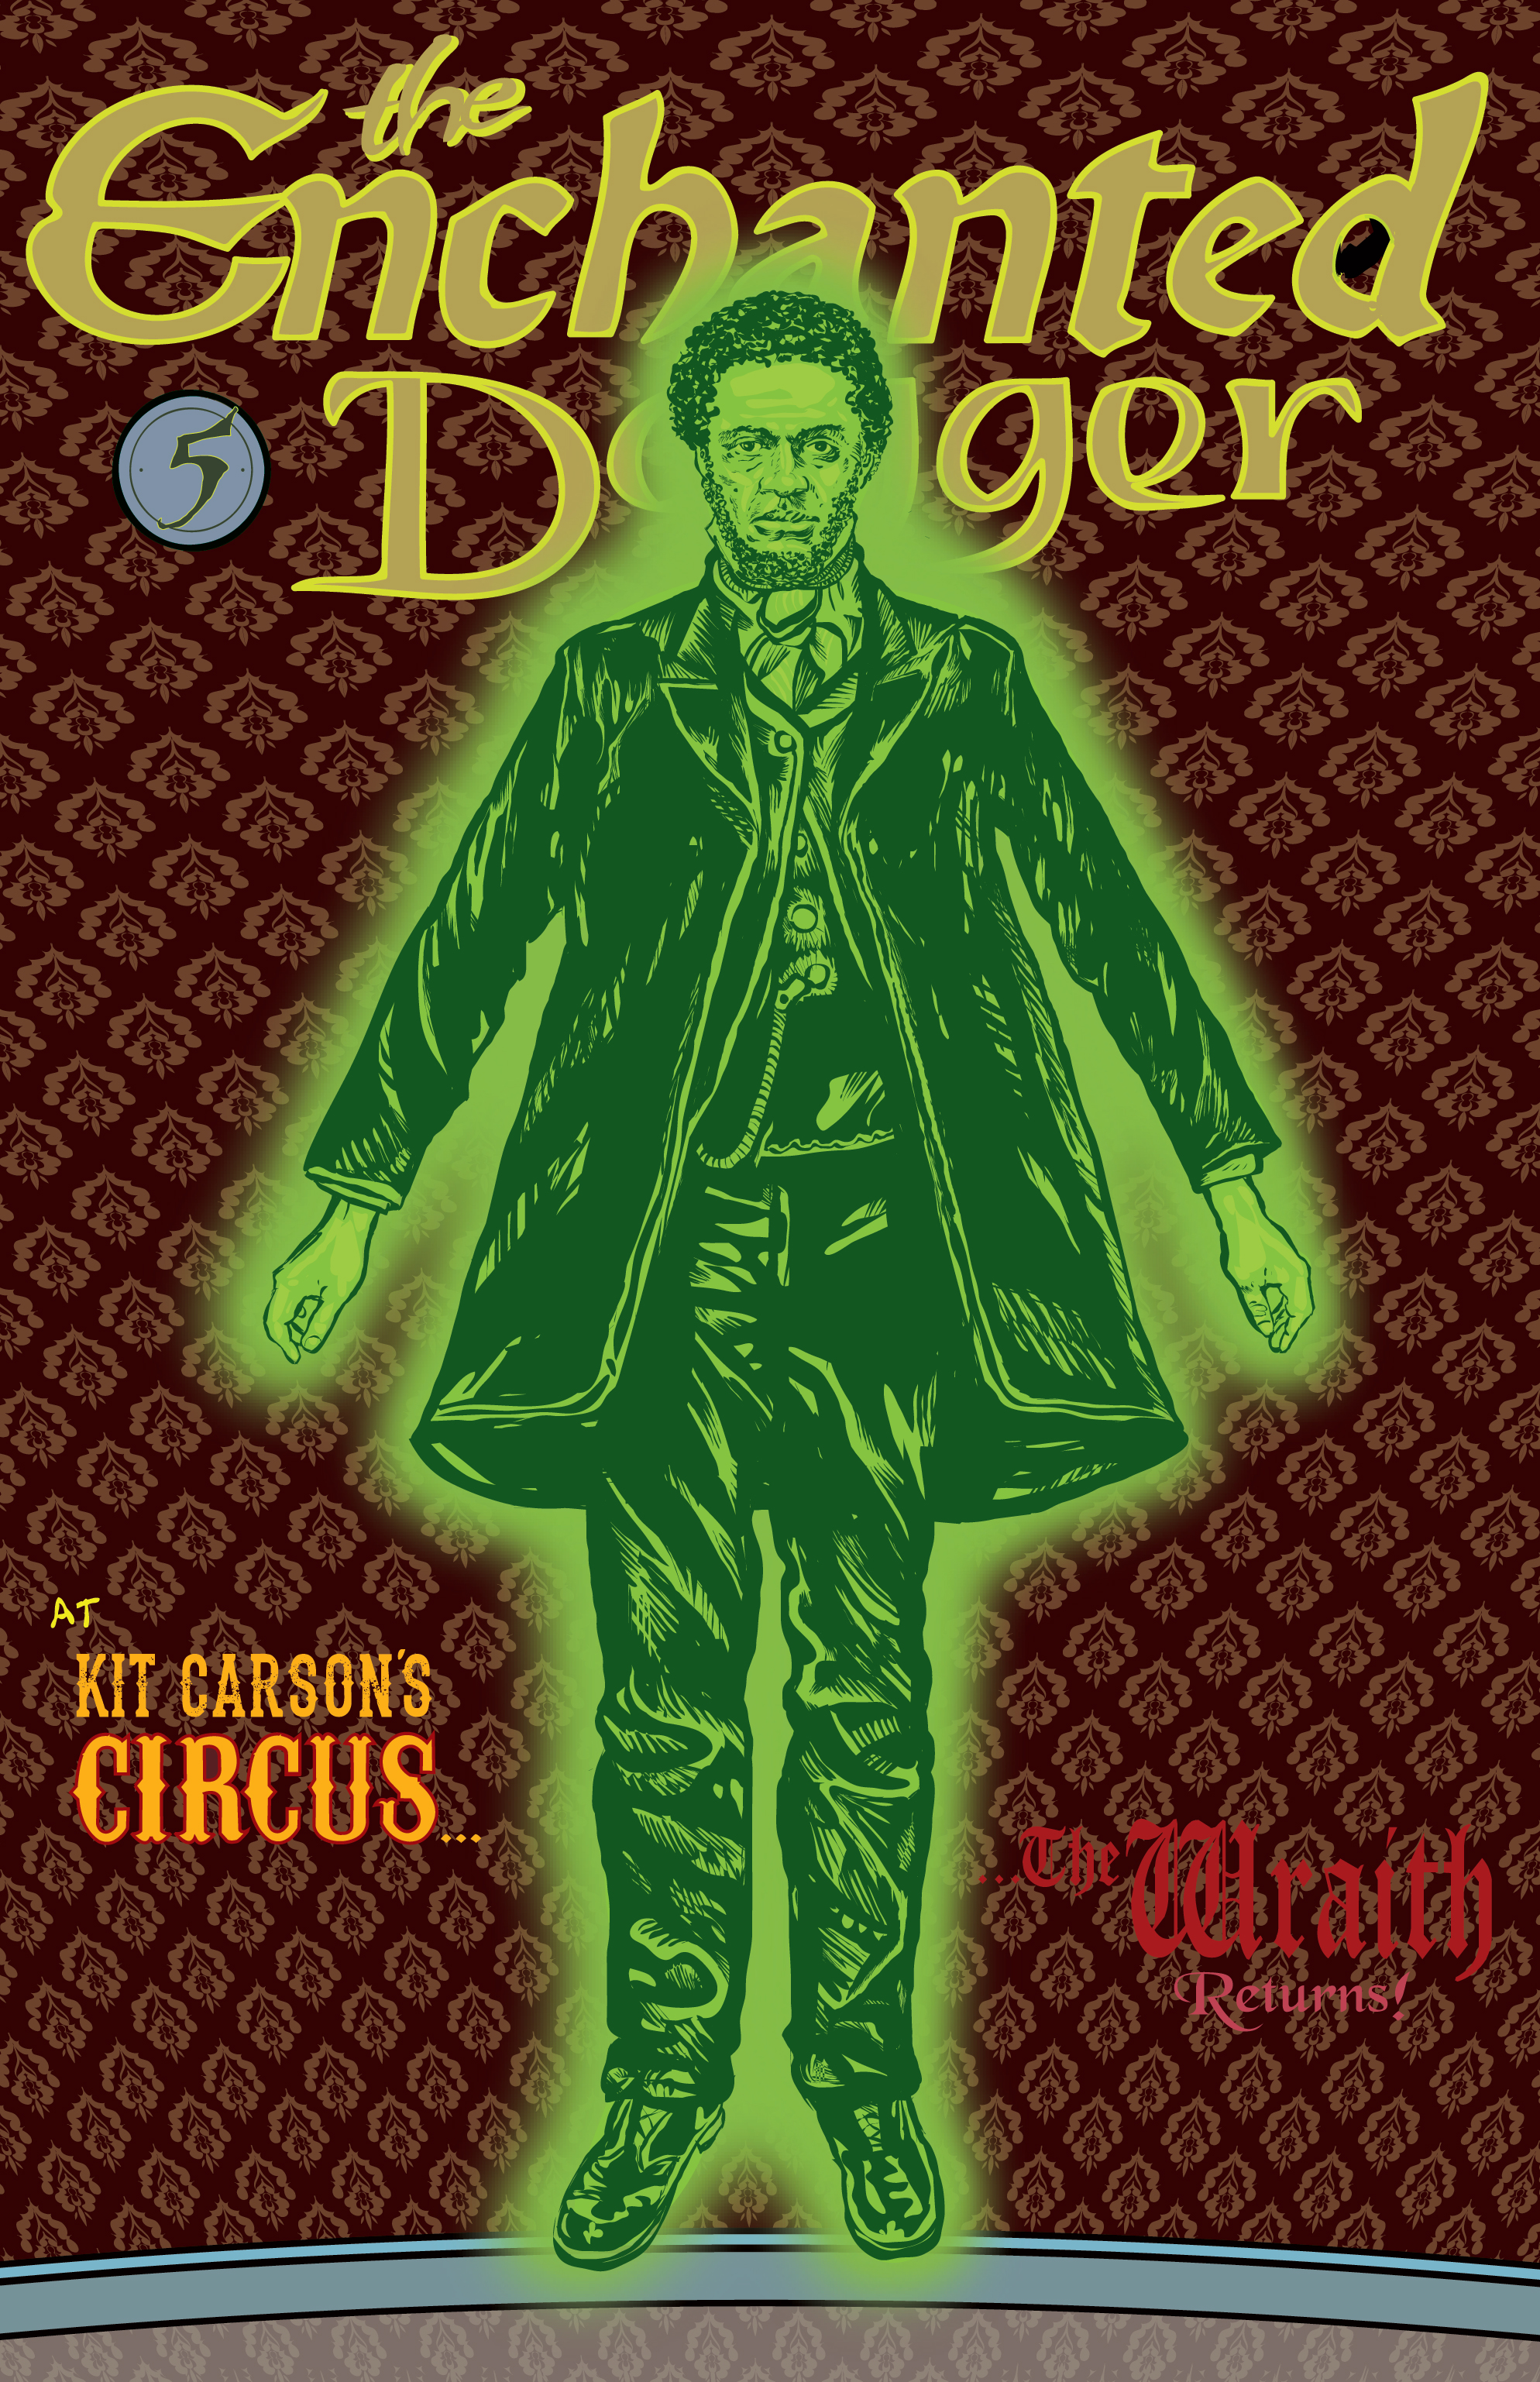 The Enchanted Dagger #5 – Cover